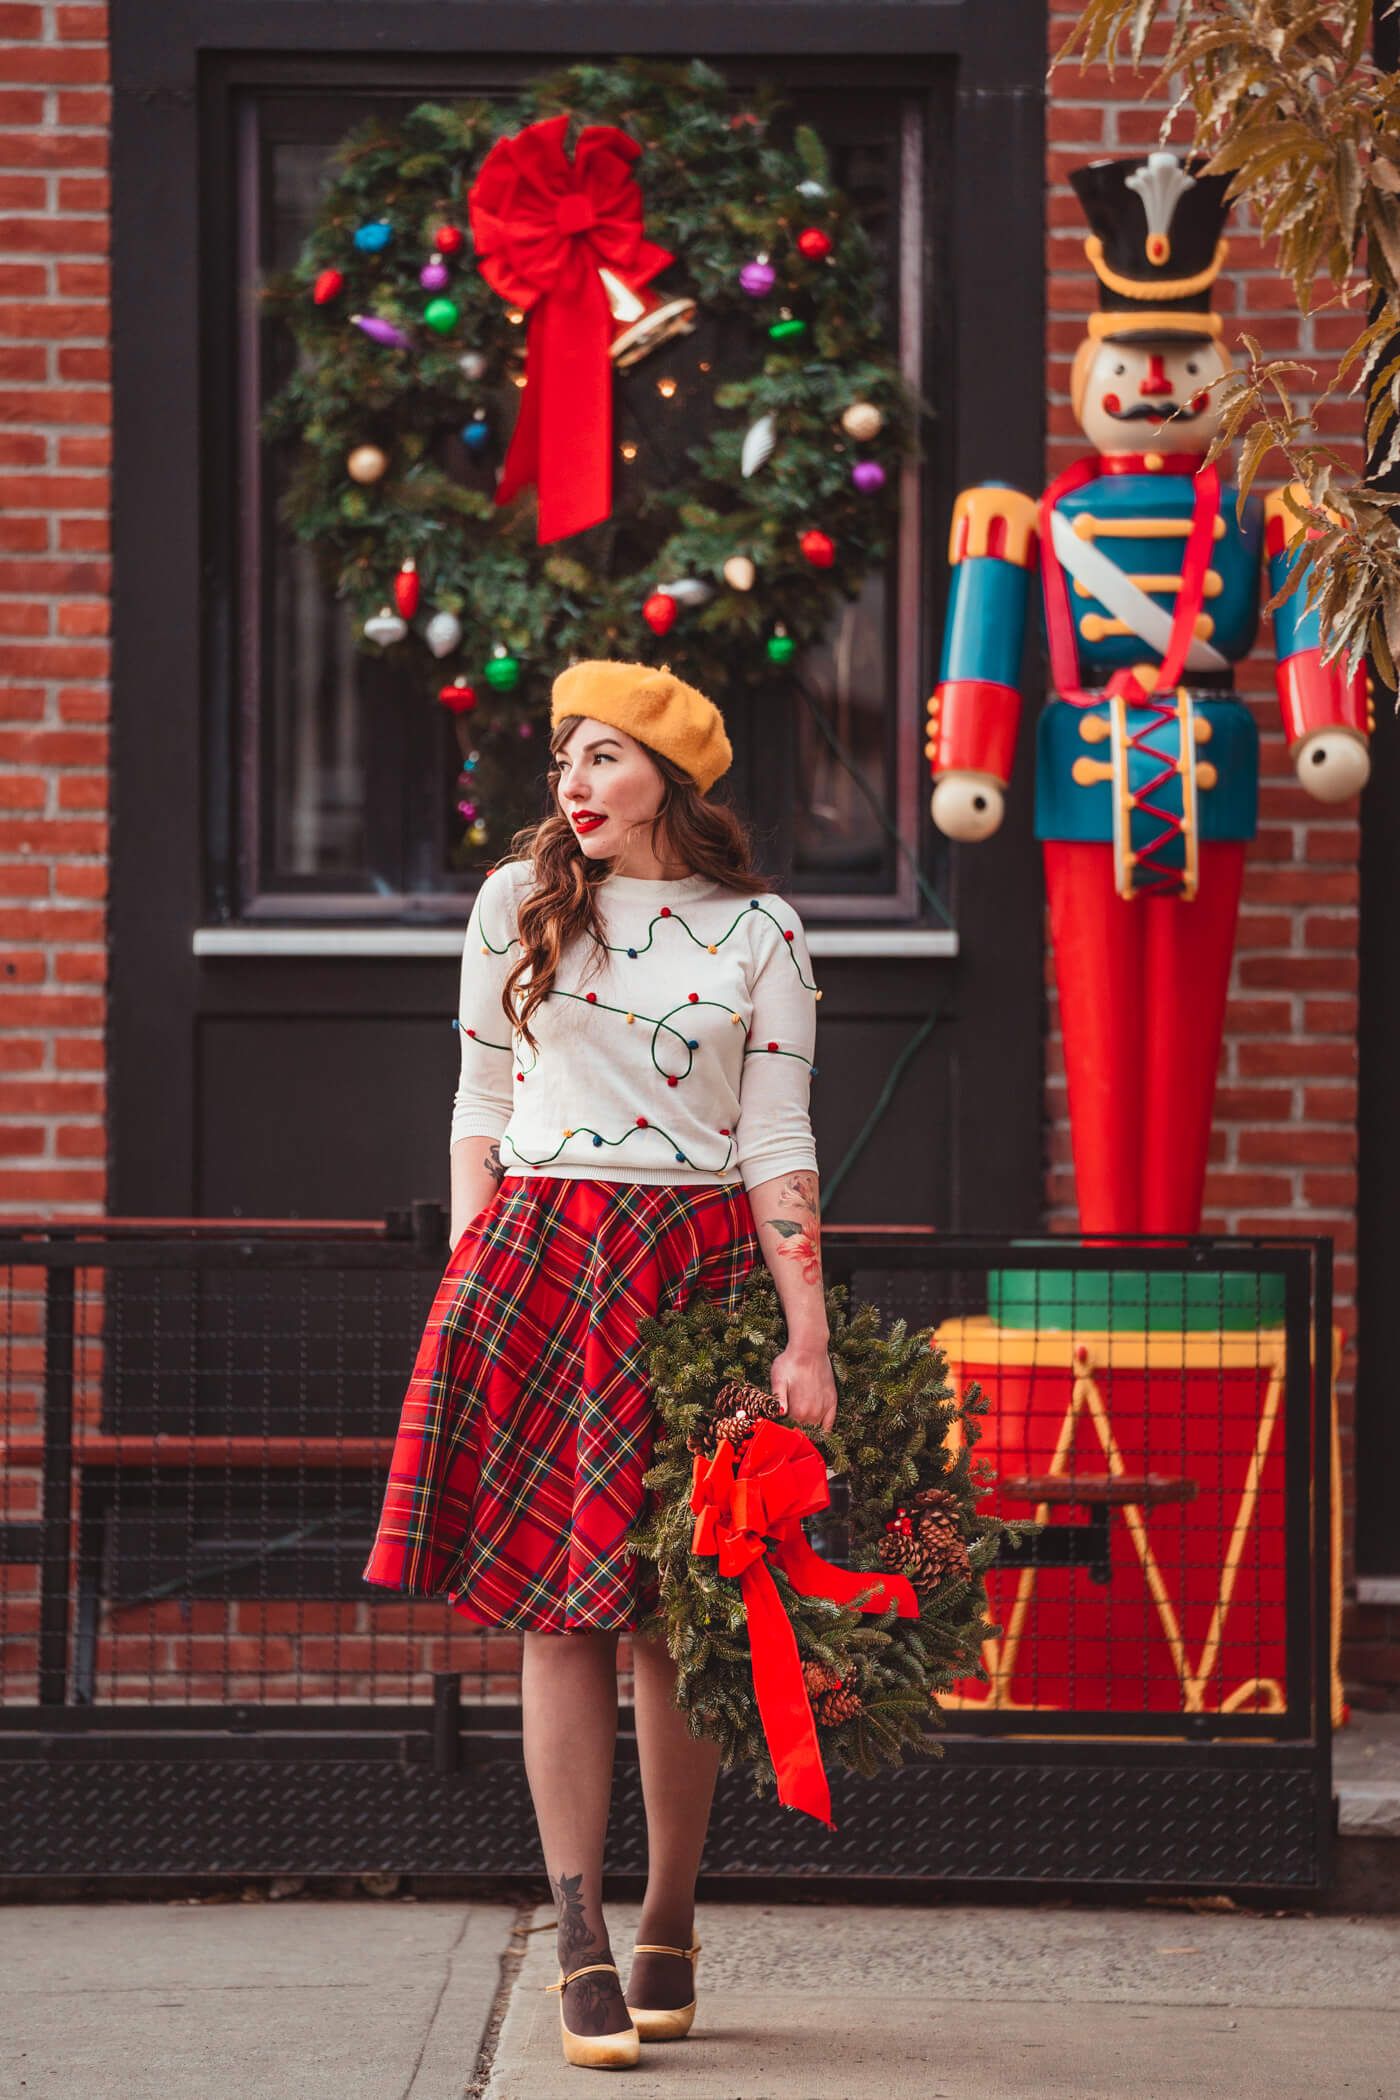 Styling Ideas for Christmas Skirt Outfits